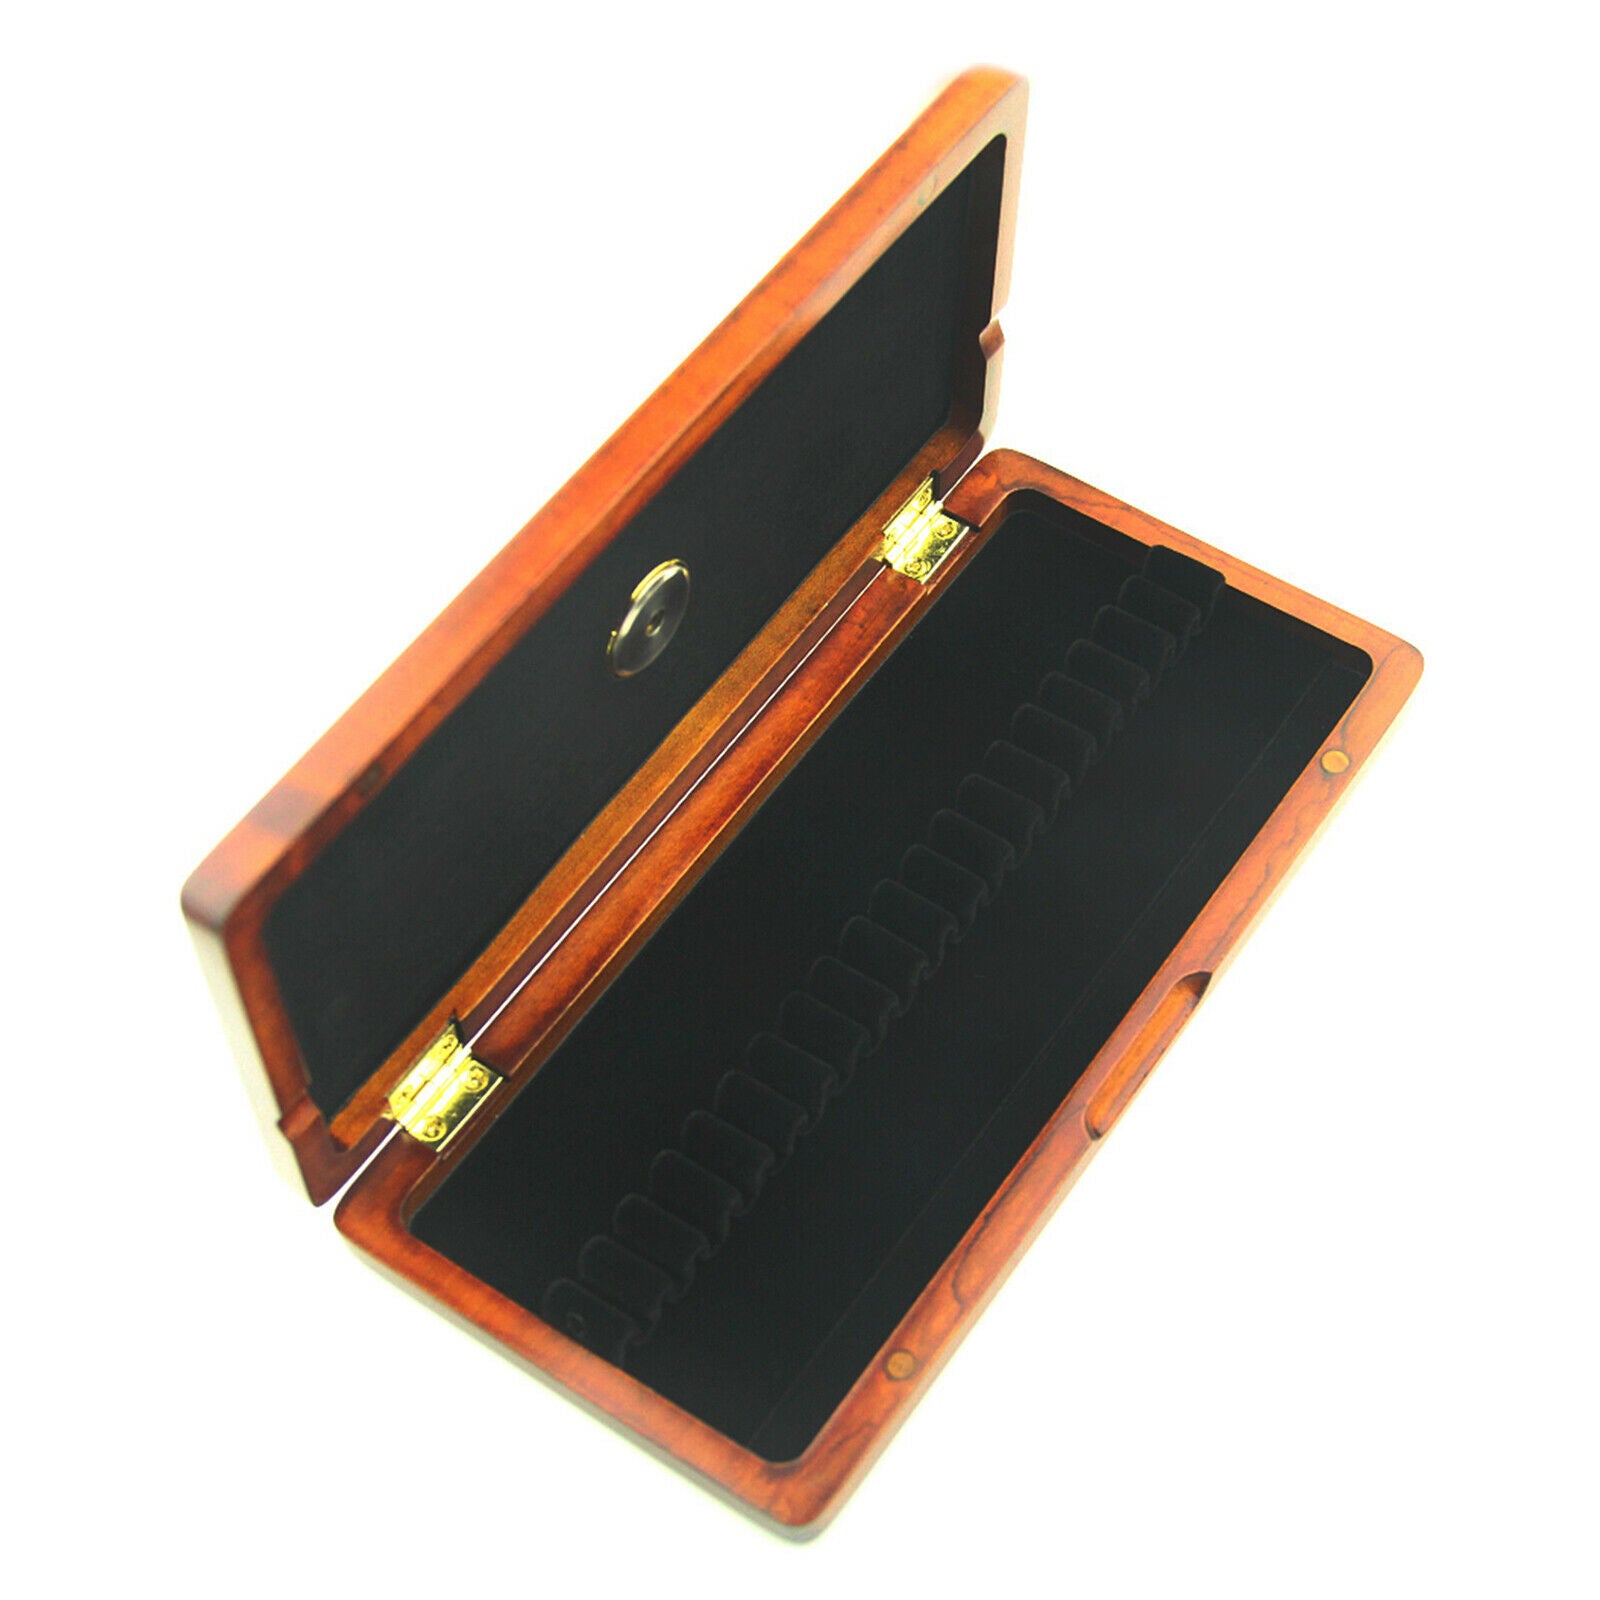 Solid Wood Oboe Reed Case Bulit-in Hygroneter Soft Slot Humidity Control